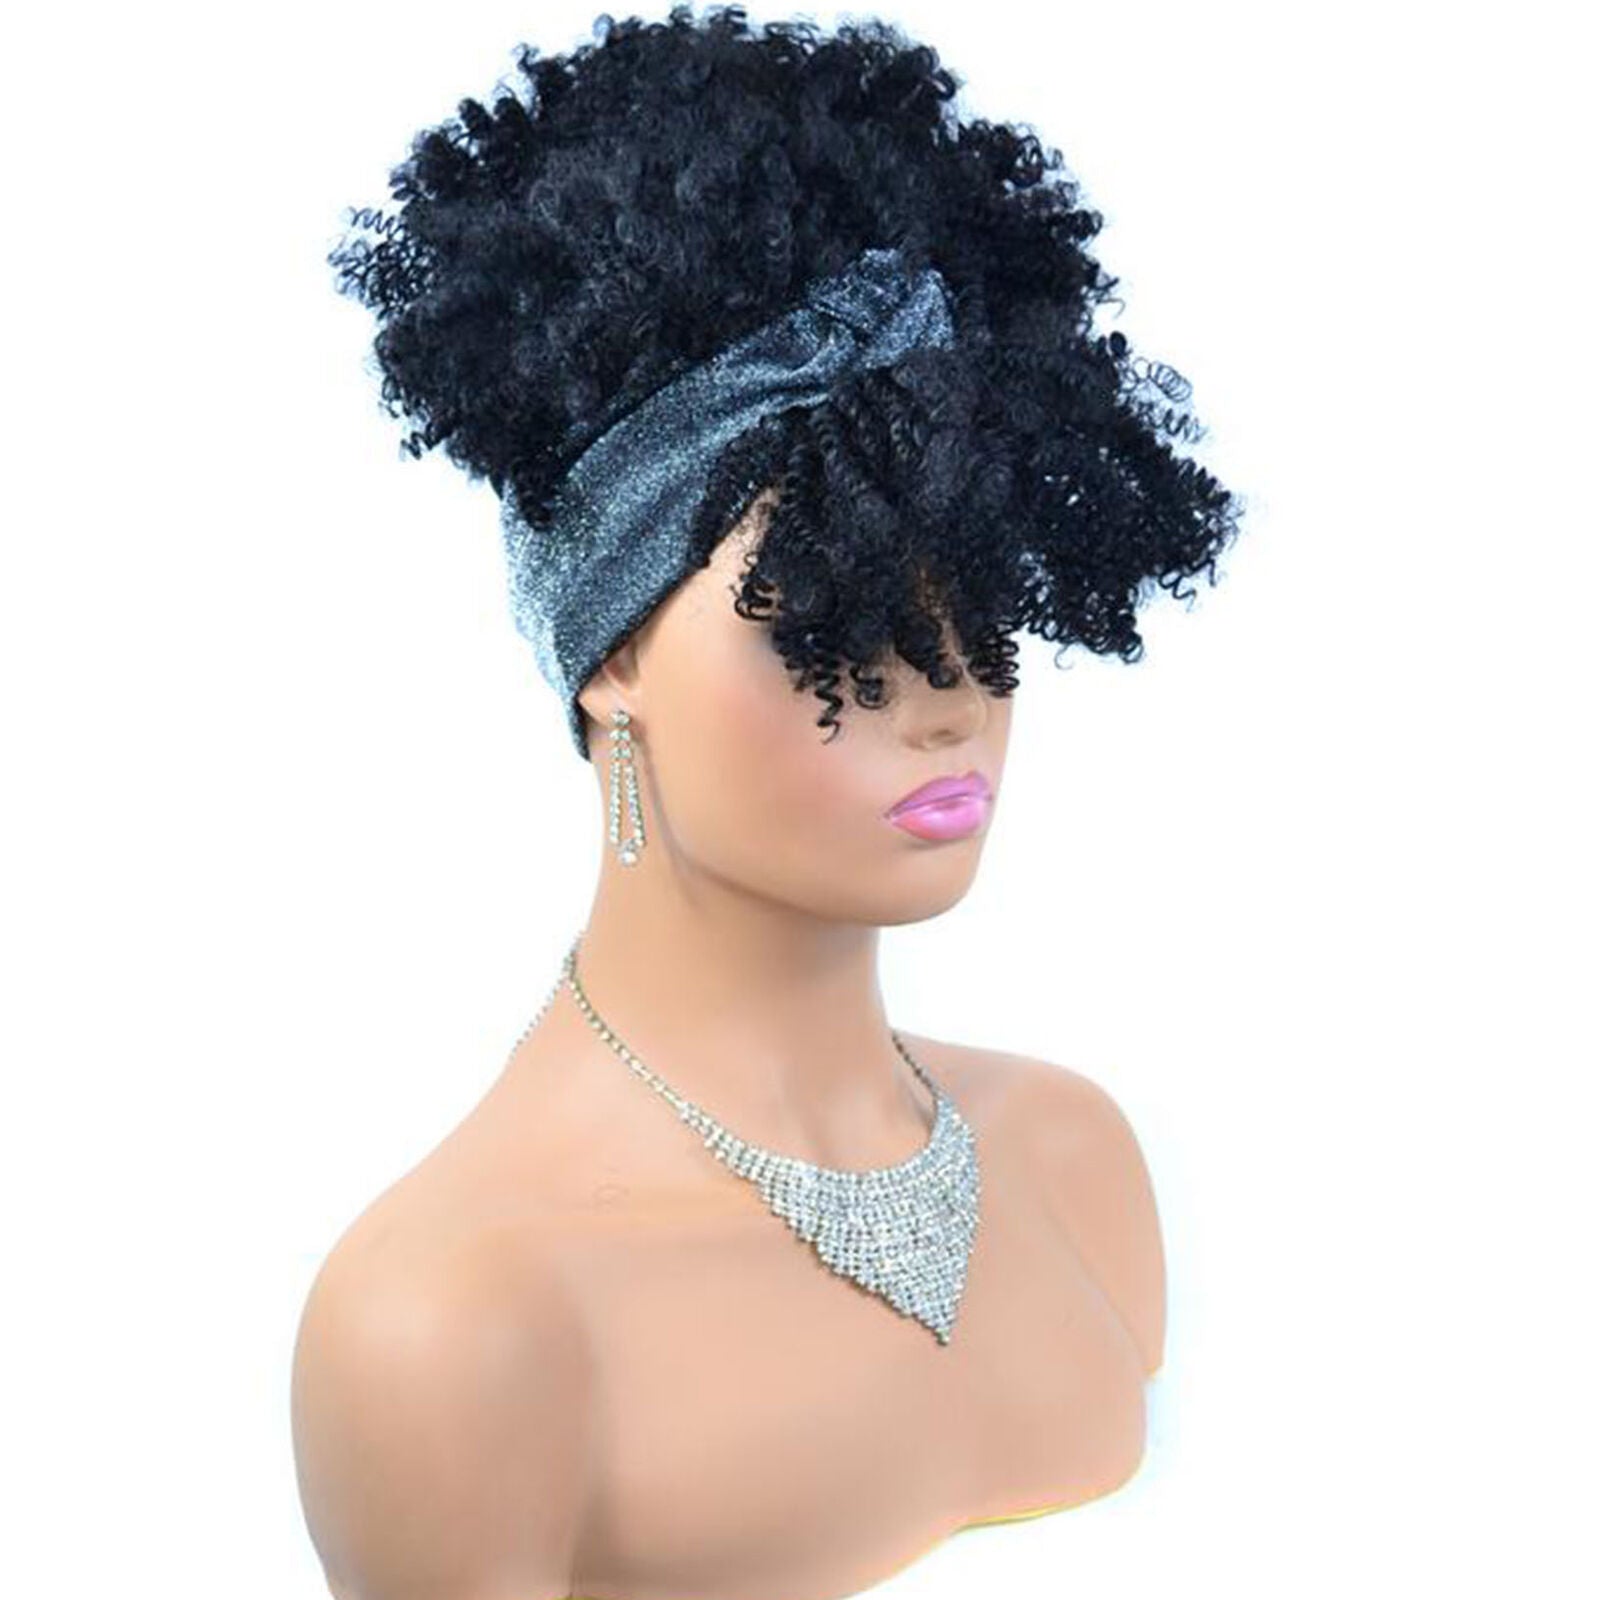 Black Short Afro Kinky Curly Wigs With Bangs Headband Wrap Wig For Black Women